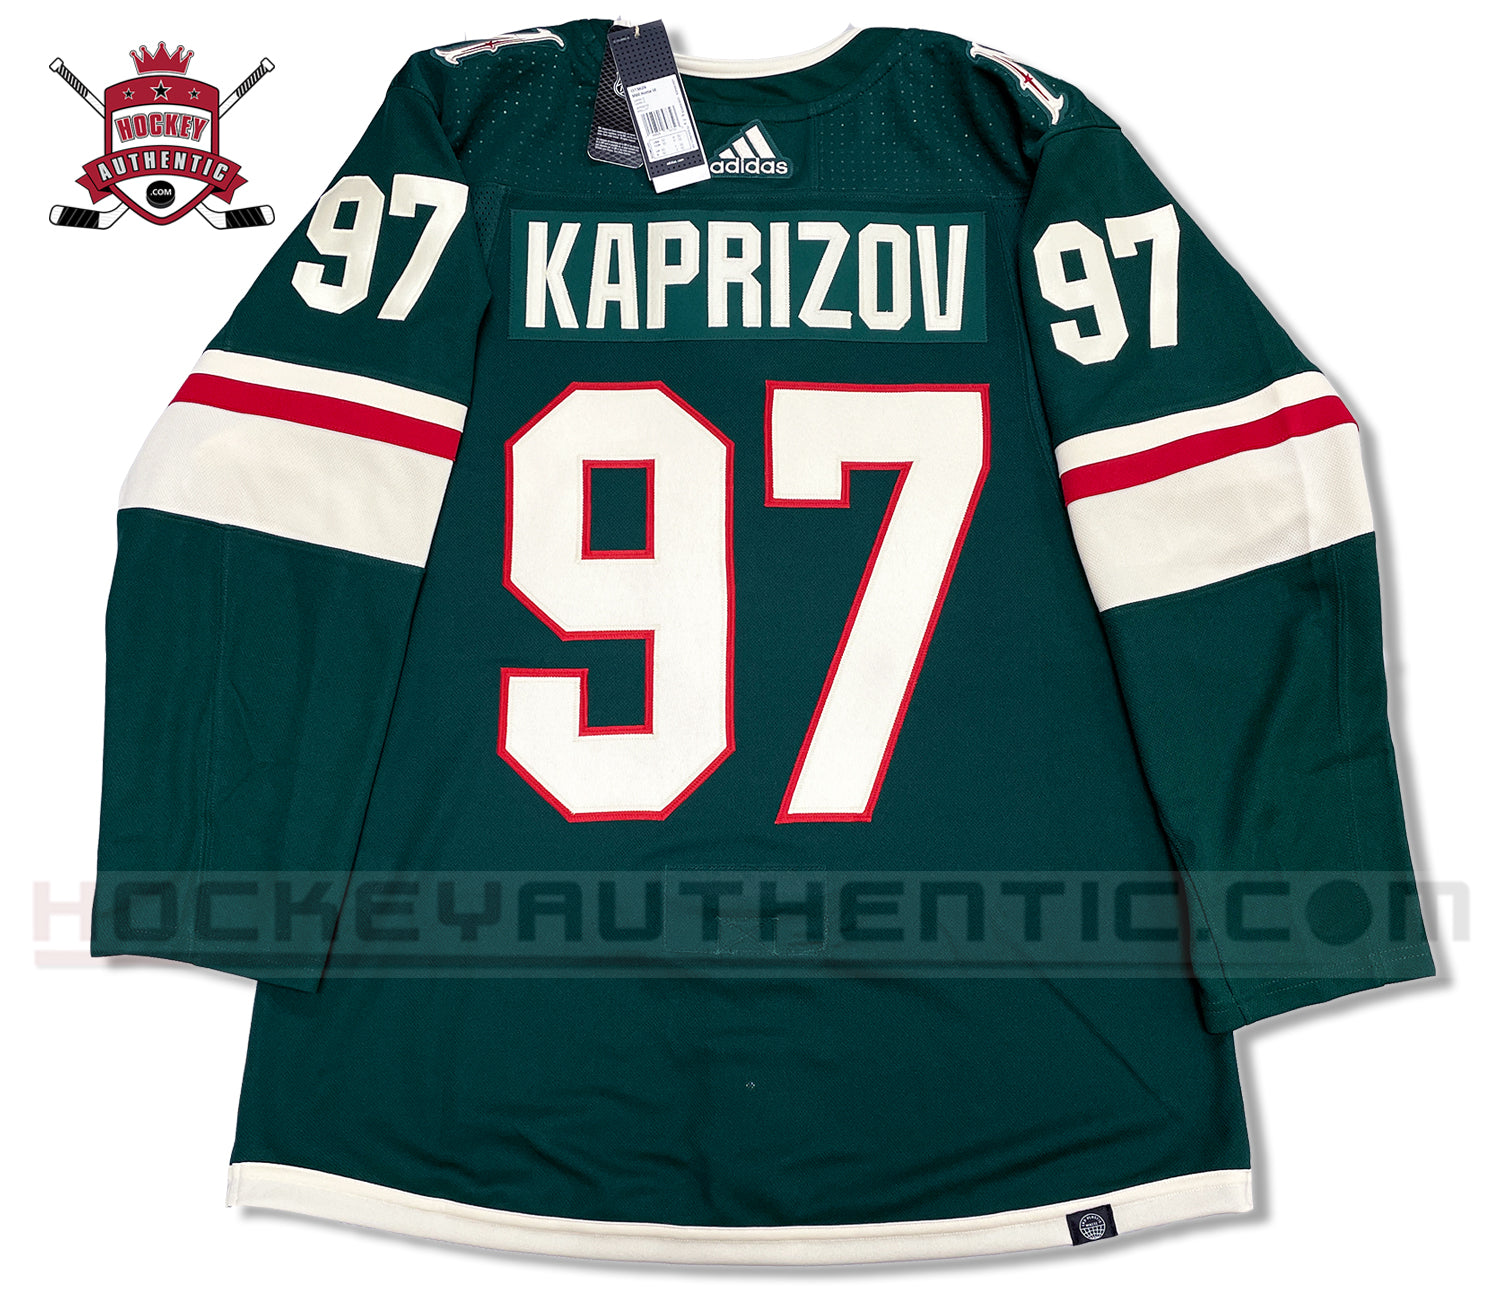 Minnesota Wild Customized Number Kit For 2003-2007 Home Jersey